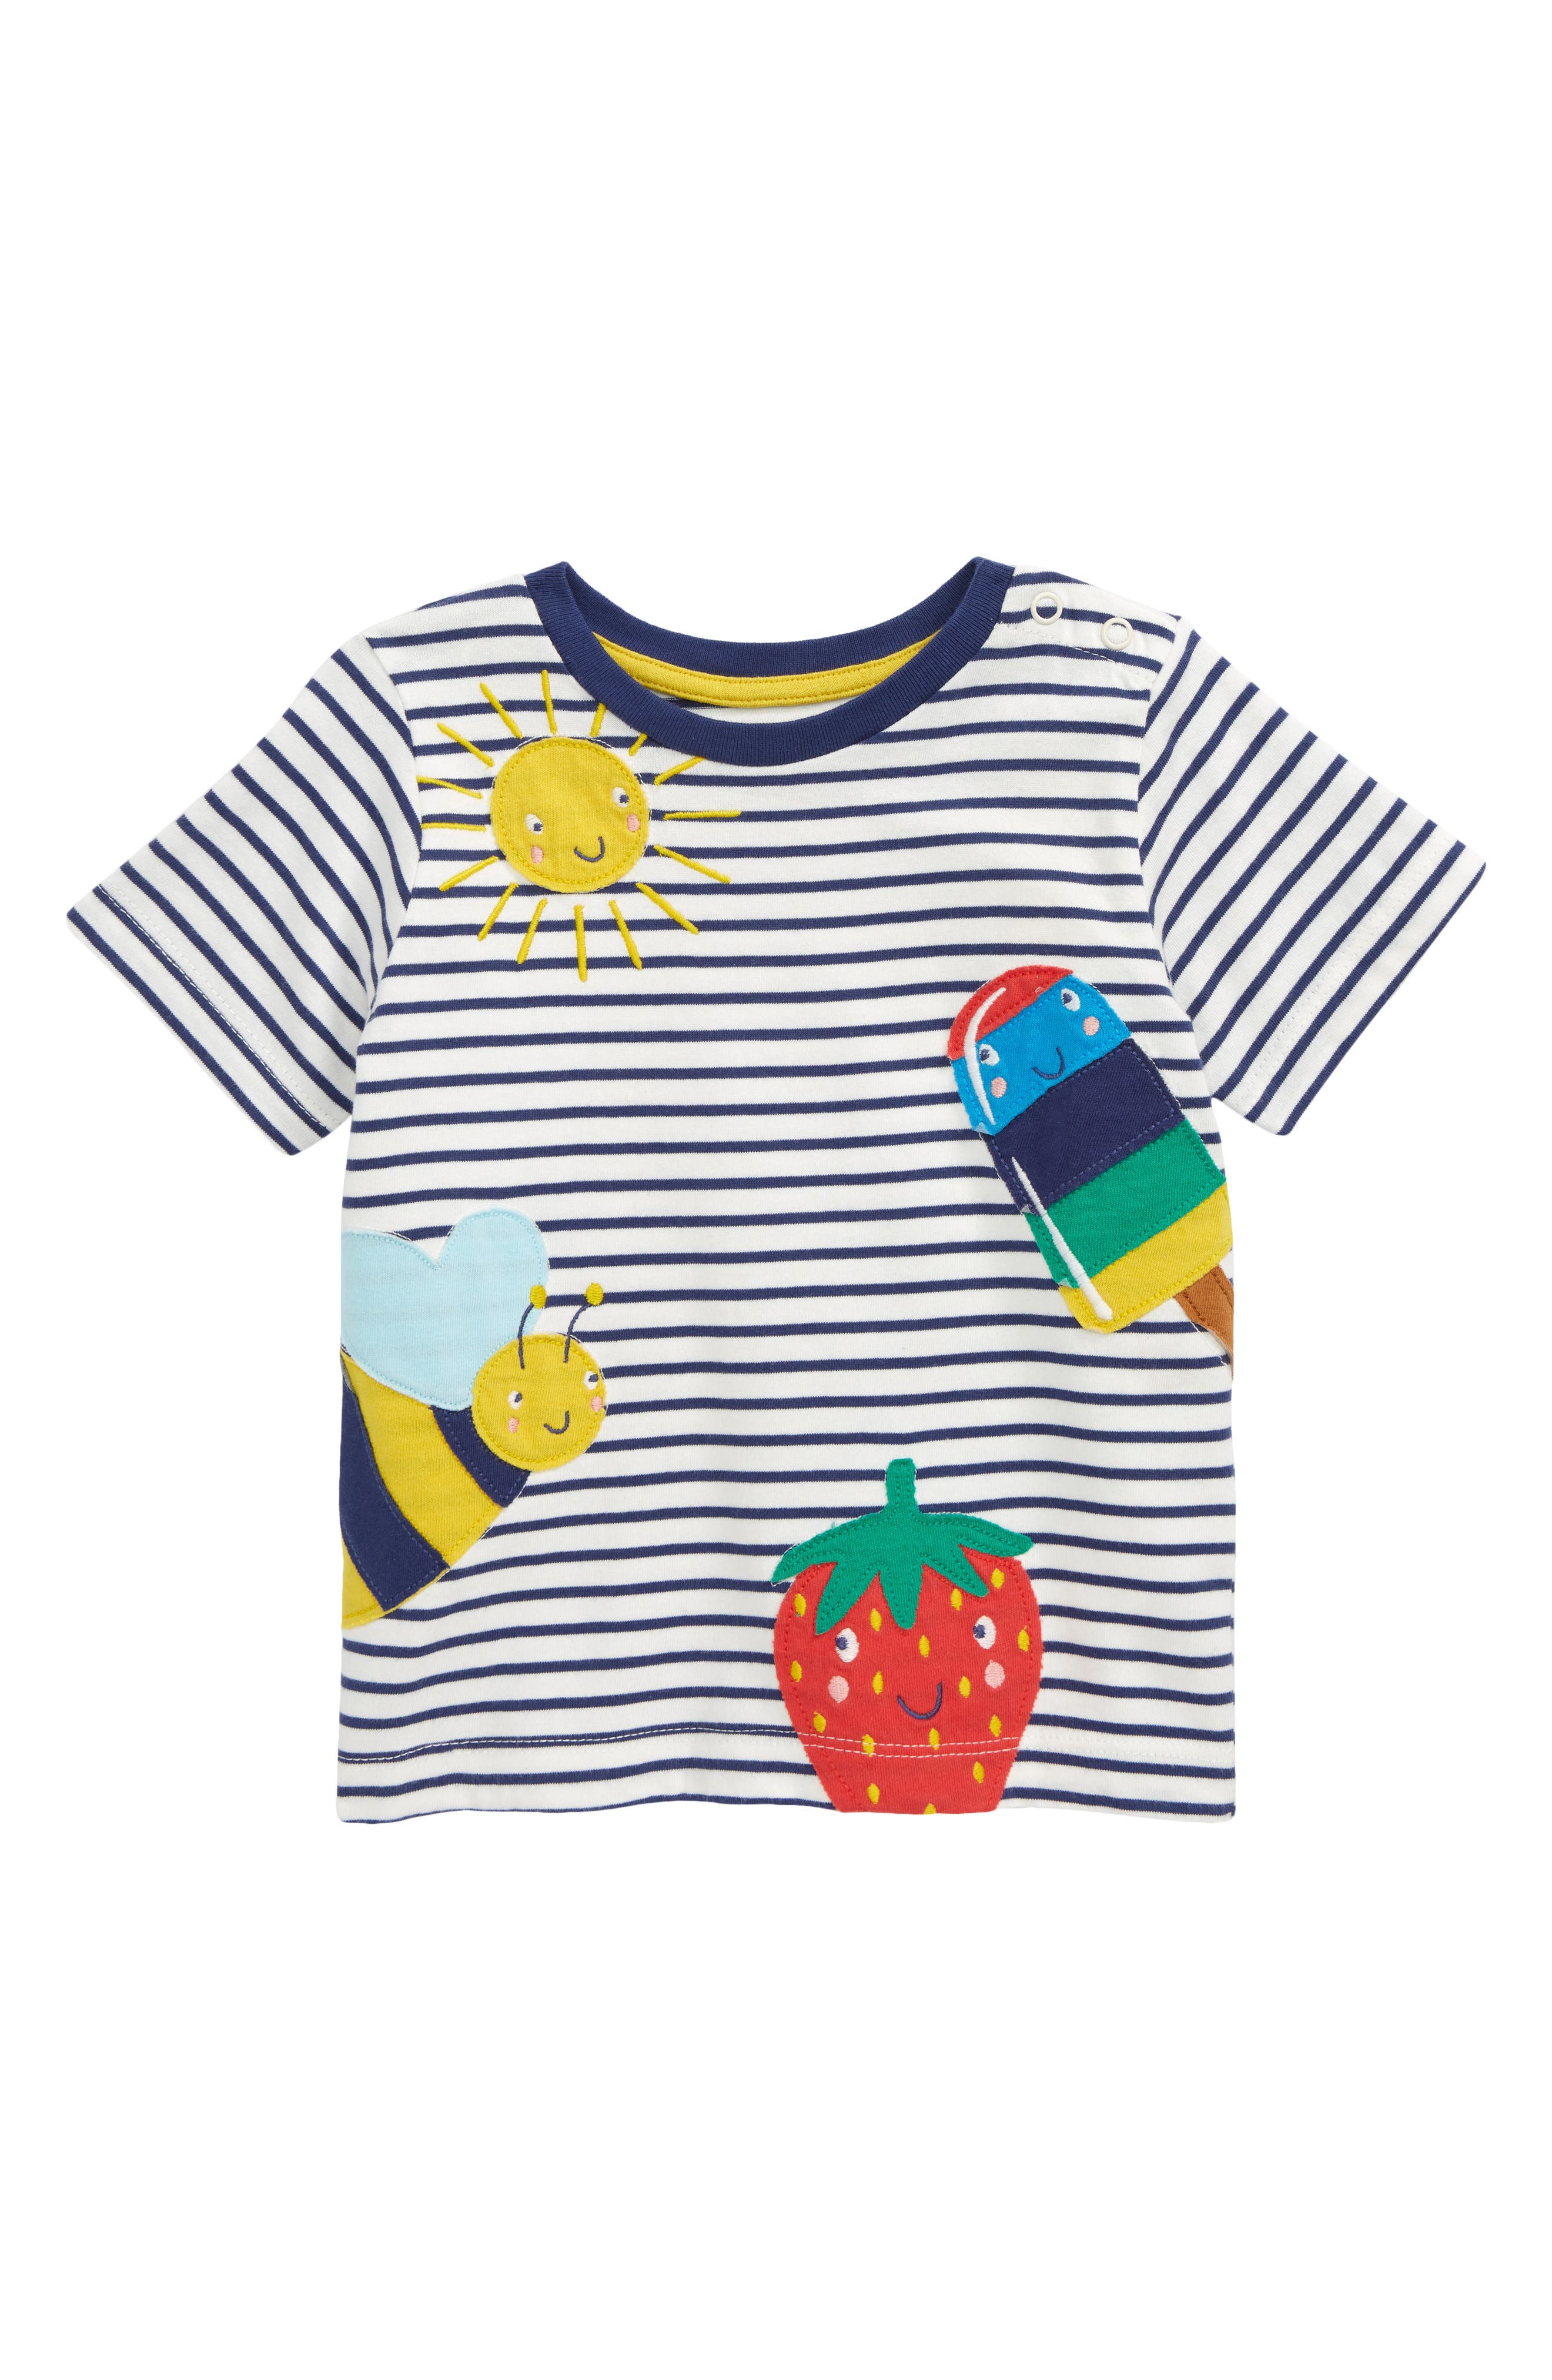 Baby Boden Boys Long Sleeve Vests 0-3Yrs TWO £6.99 FOUR £12.99